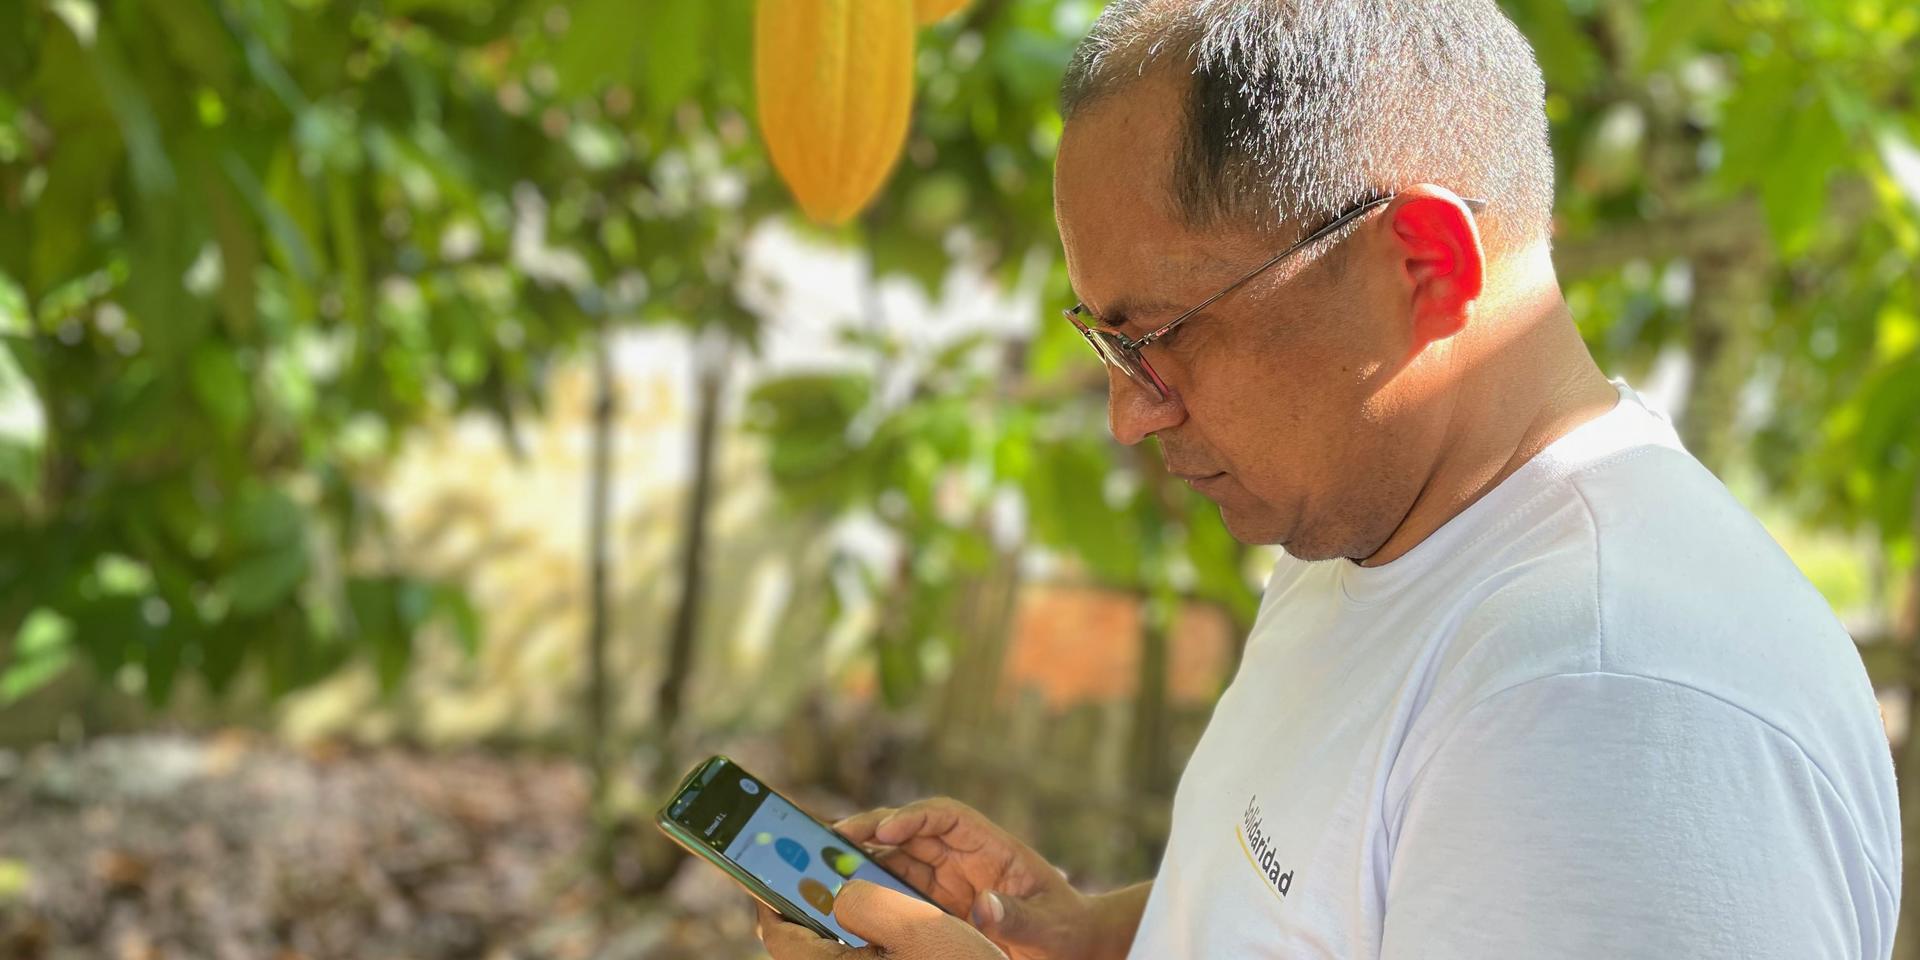 Digital Solutions to Accelerate the Transition towards Agroecological Livestock Systems in the Amazon Basin - Alliance Bioversity International - CIAT